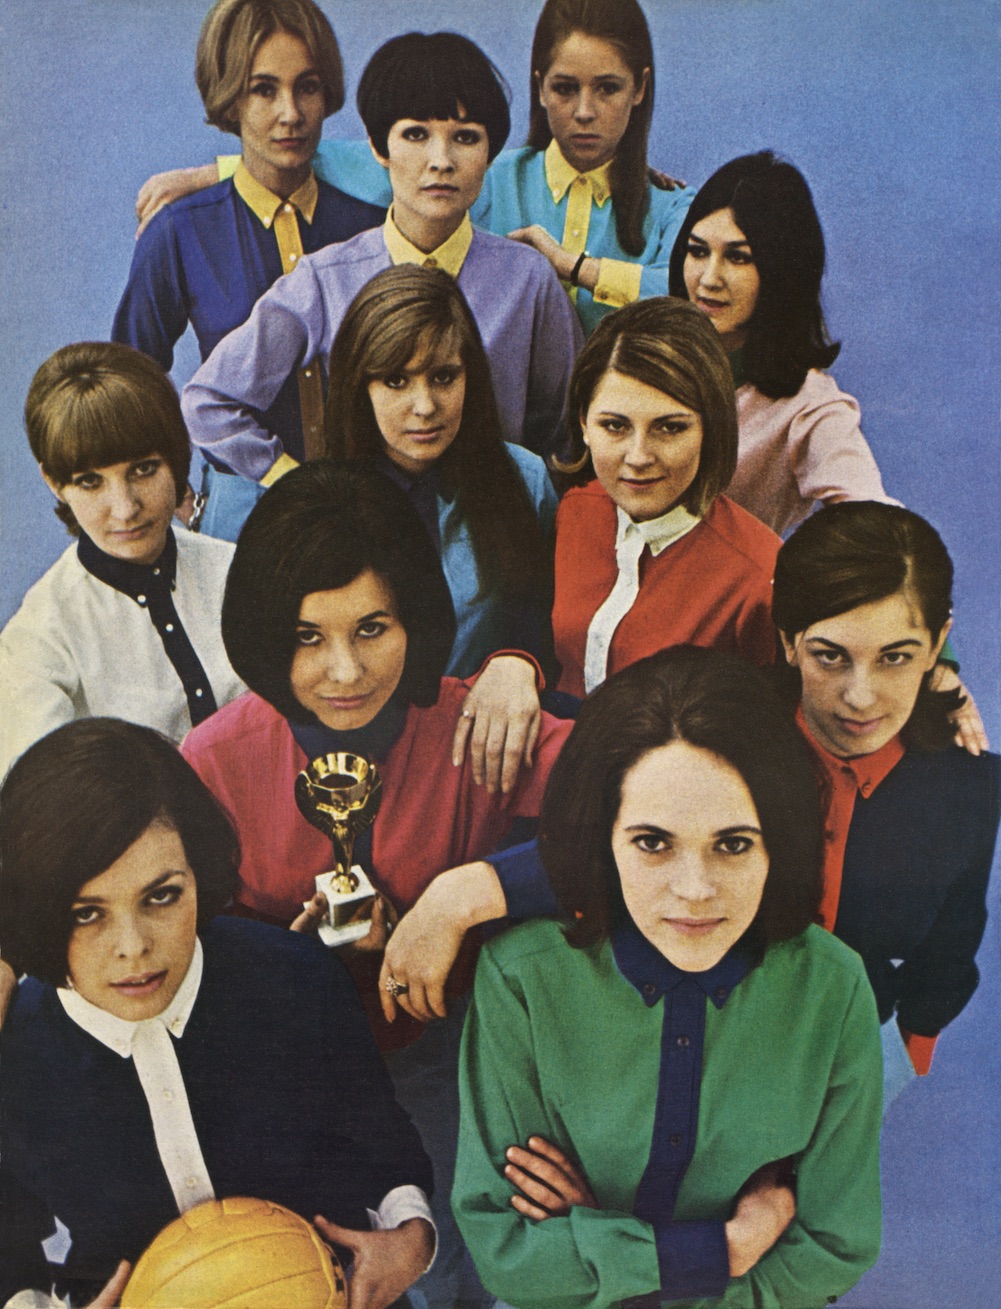 Inside an icon: London Life magazine and the Swinging Sixties 